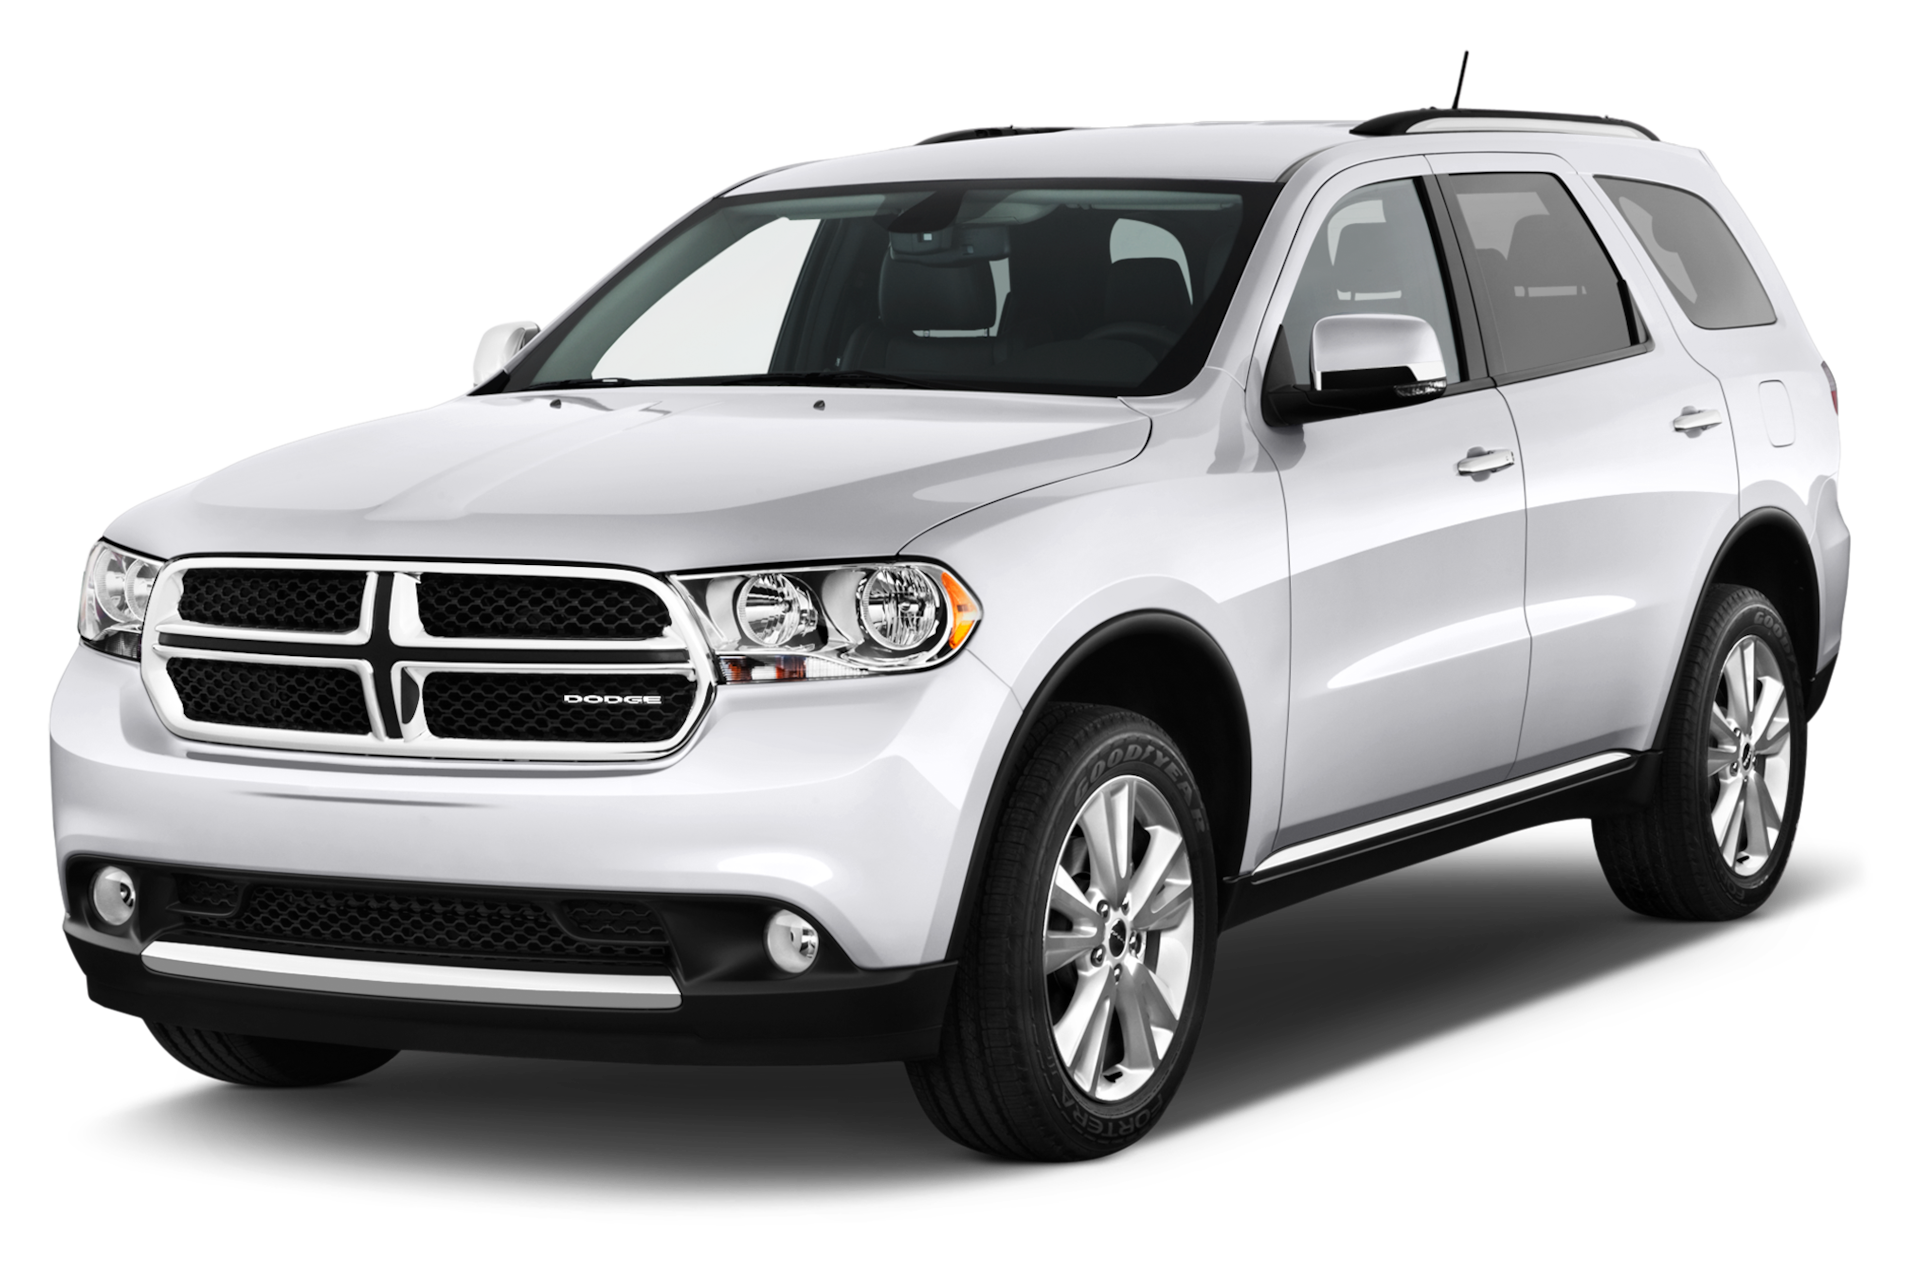 2012 Dodge Durango Prices, Reviews, and Photos - MotorTrend